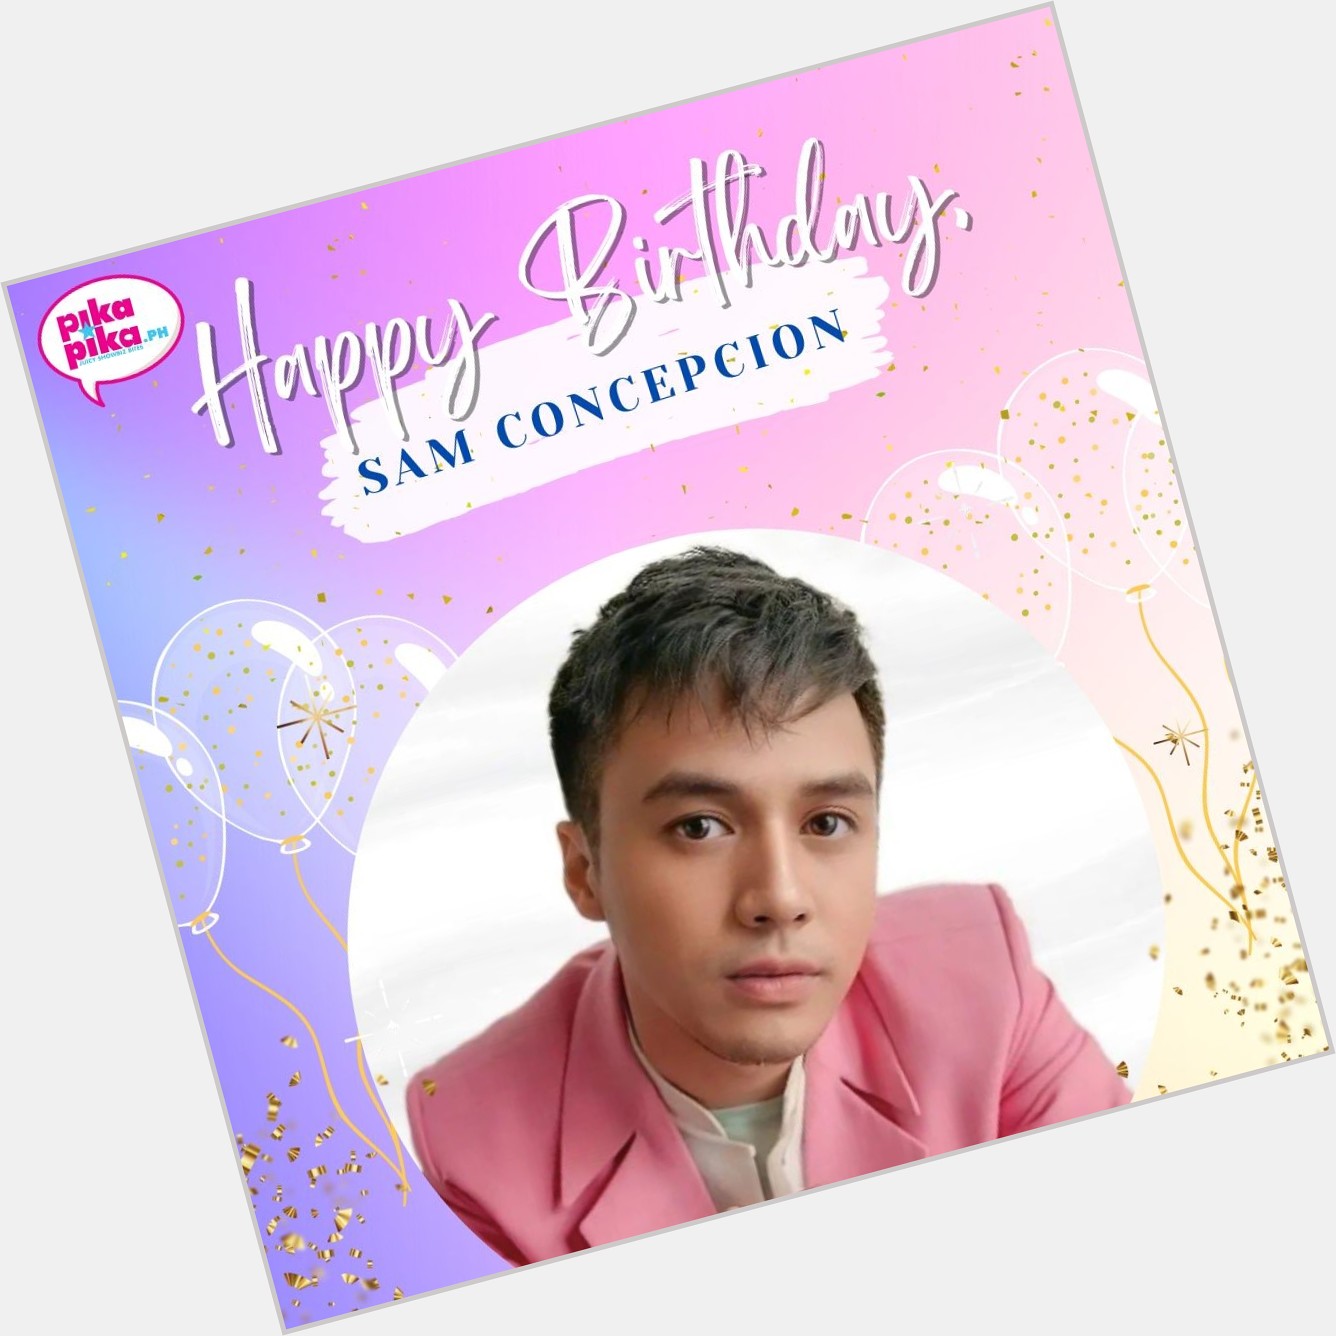 Happy birthday, Sam Concepcion! May your special day be filled with love and cheers.    